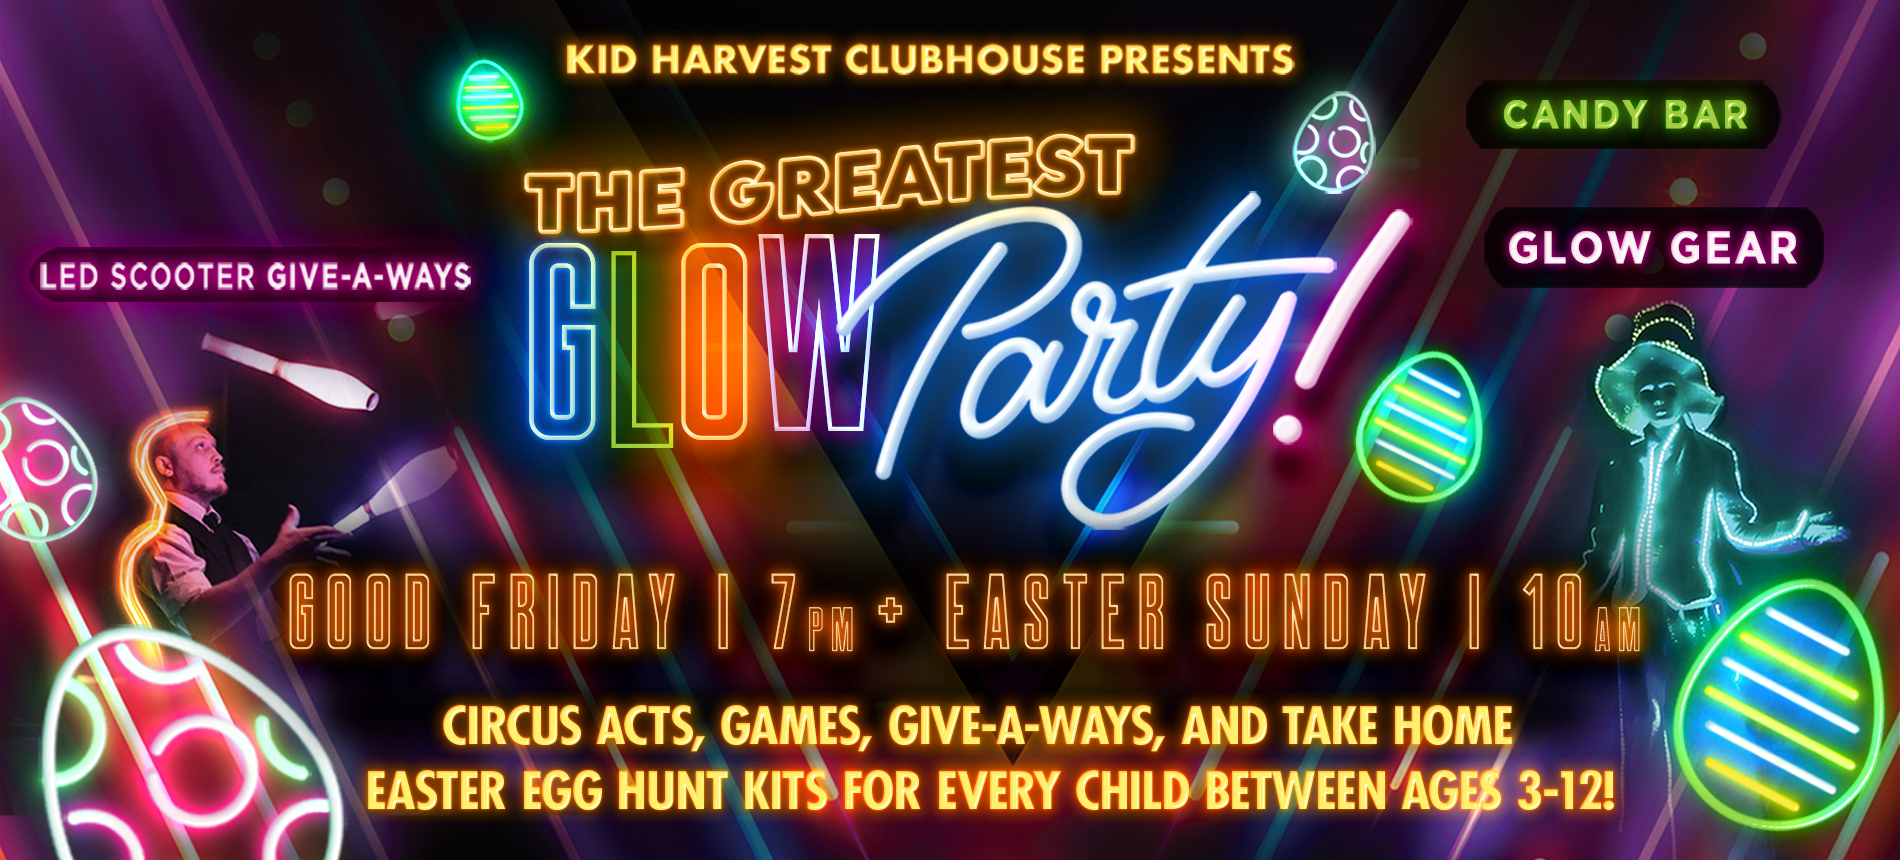 Kid Harvest Clubhouse Presents the Greatest Glow Party! Led Scooter, Give-a-ways, Candy Bar, Glow Gear, Good Friday 7 Pm + Easter Sunday 10am Circus Acts, Games, Give-a-Ways, and Take Home Easter Egg Hunt Kits for Every Child Between Ages 3-12!